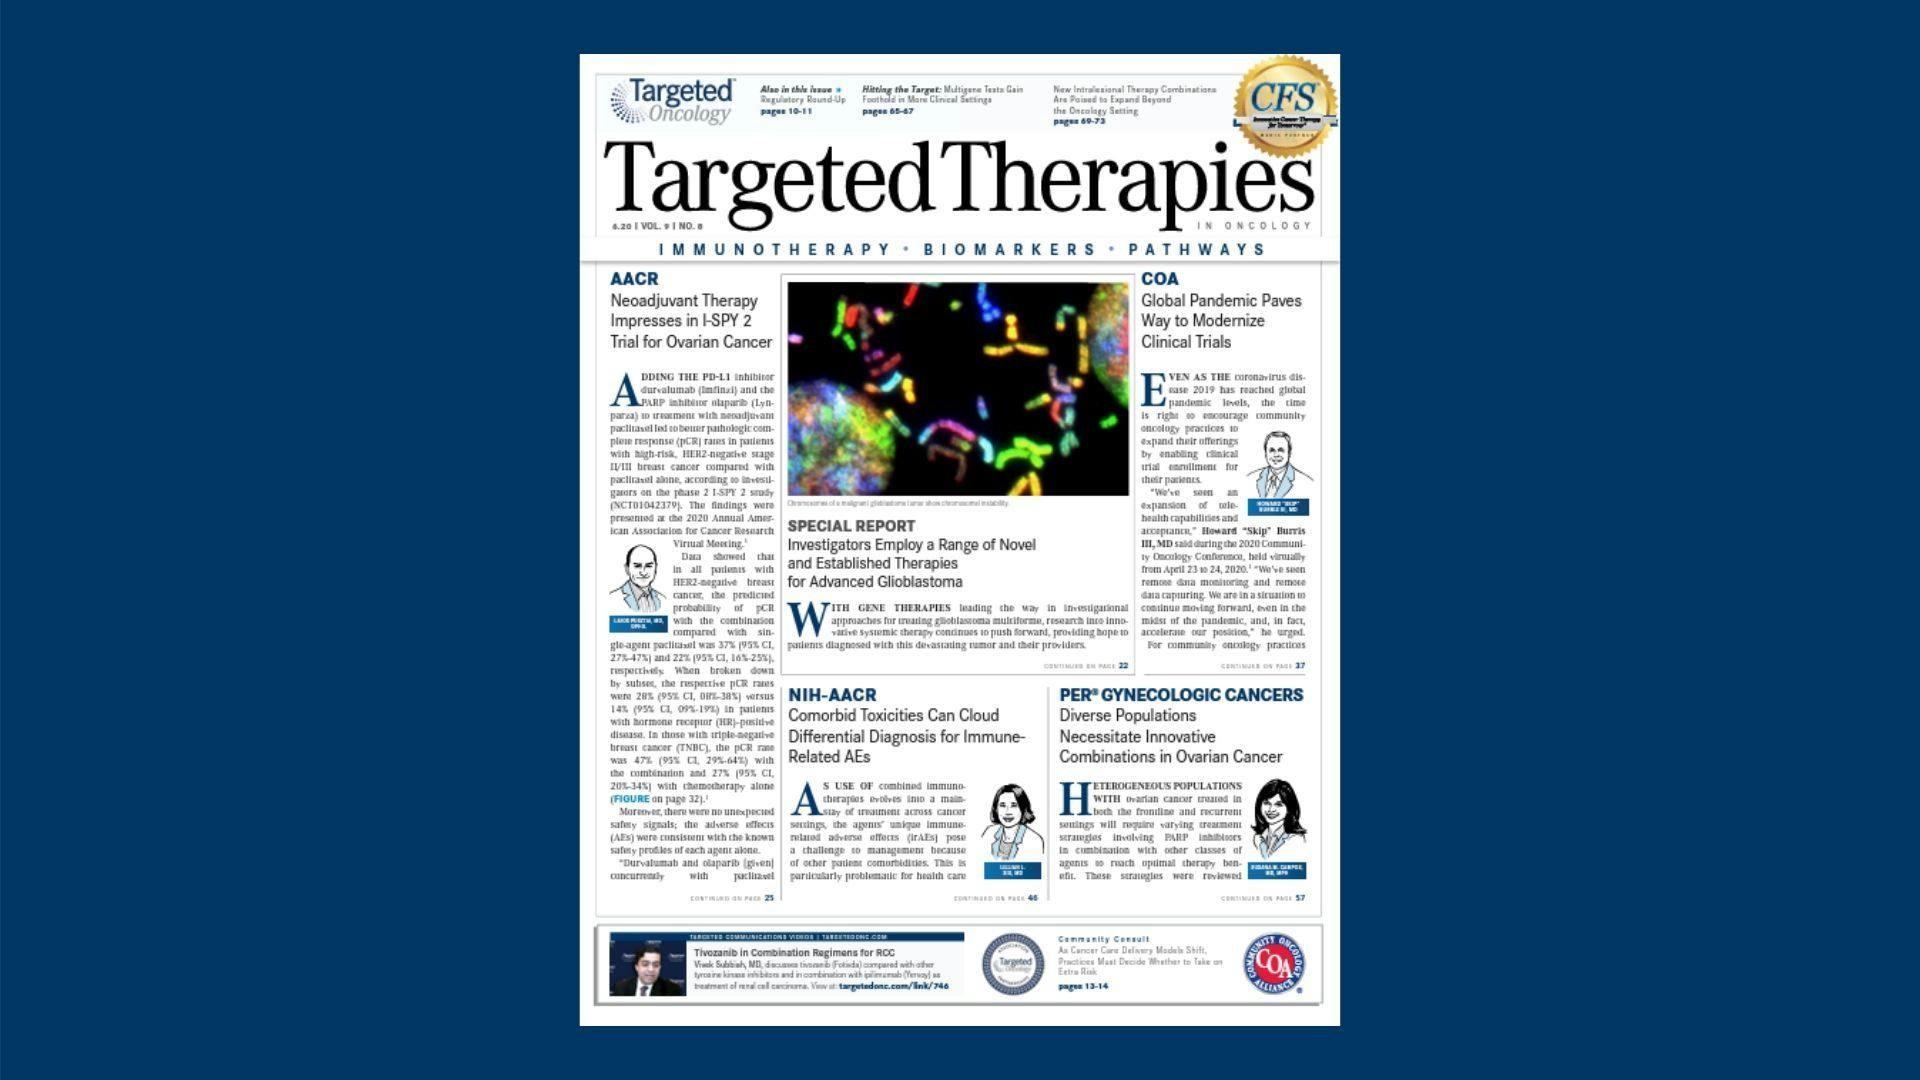 New Intralesional Therapy Combinations Are Poised to Expand Beyond the Oncology Setting